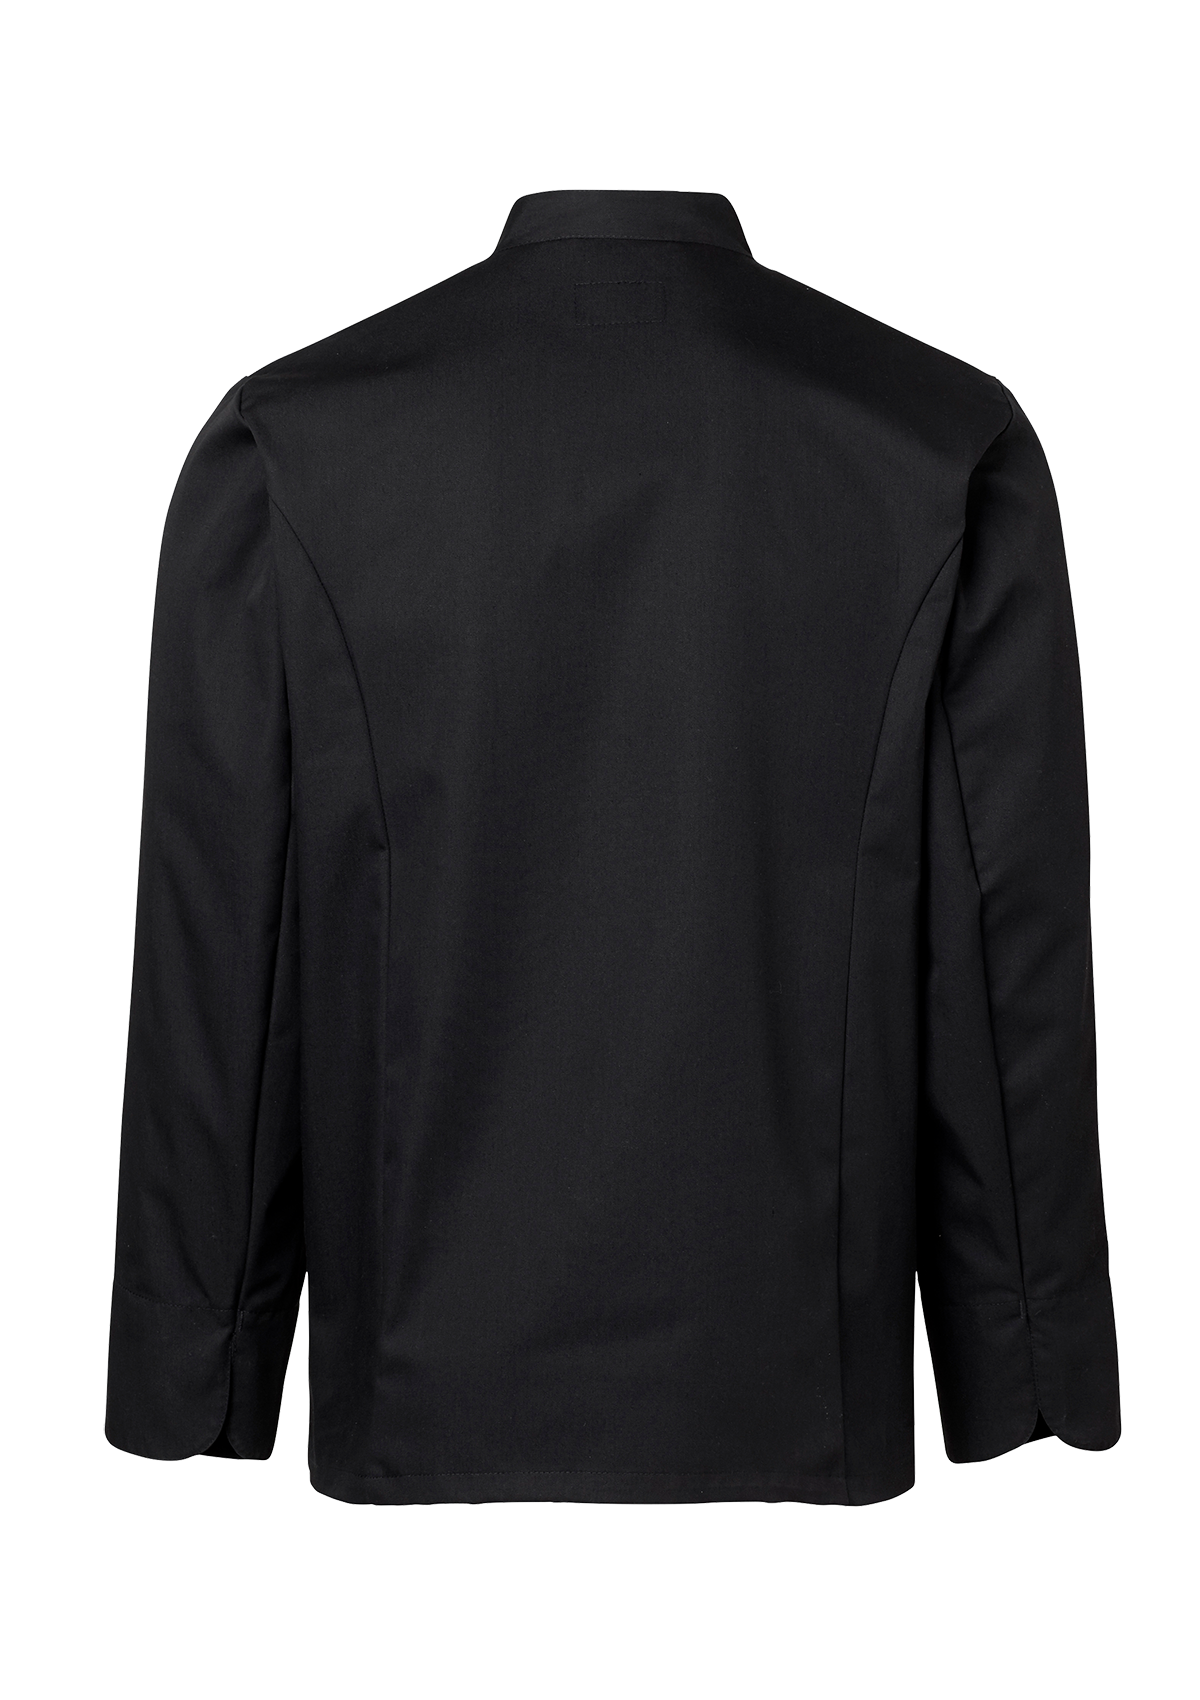 Men's chef jacket in straight cut and long sleeves. Segers | Cookniche